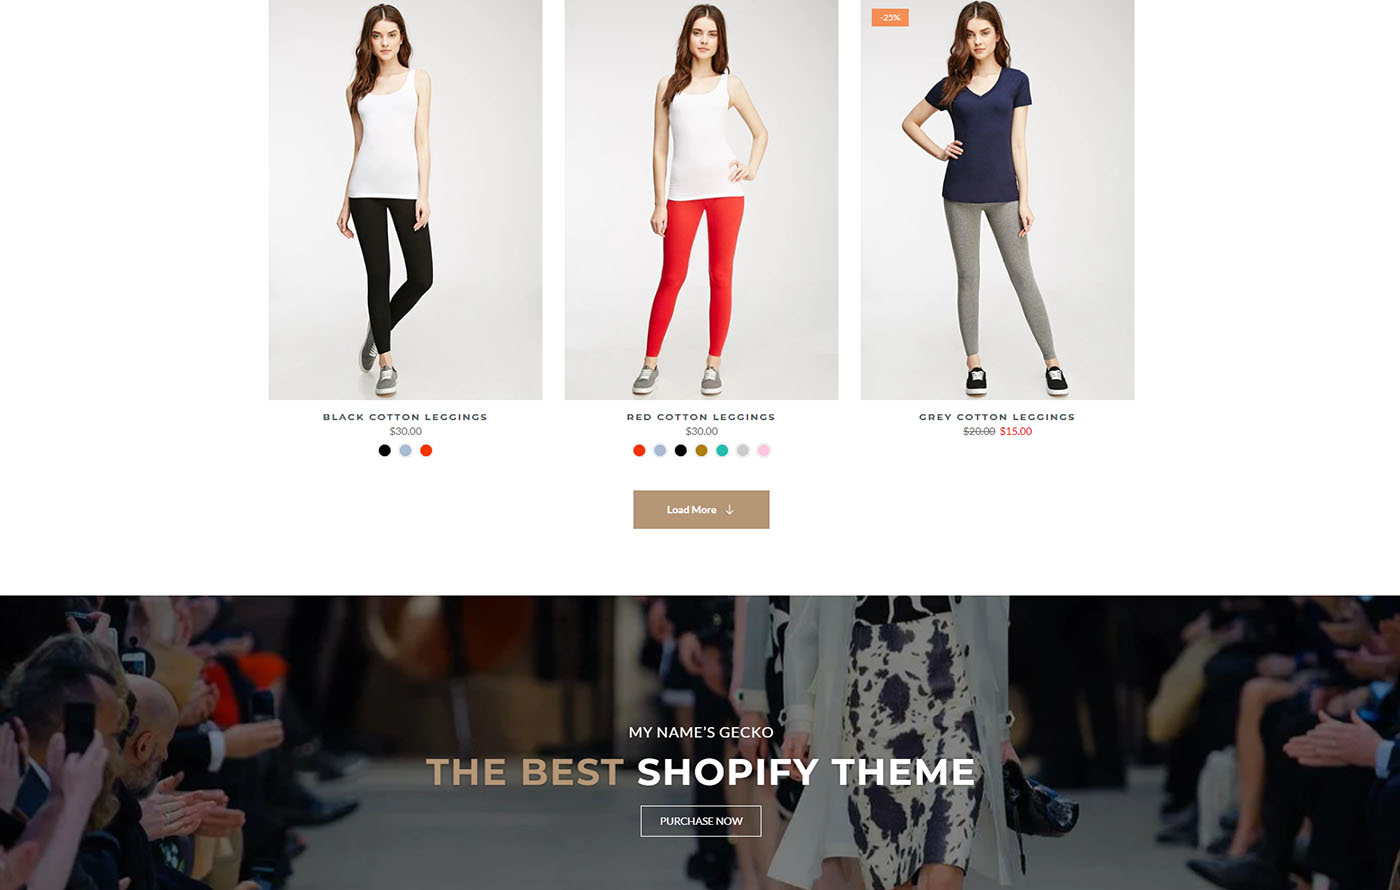 Gecko - Clothes Shopify template built by EComposer